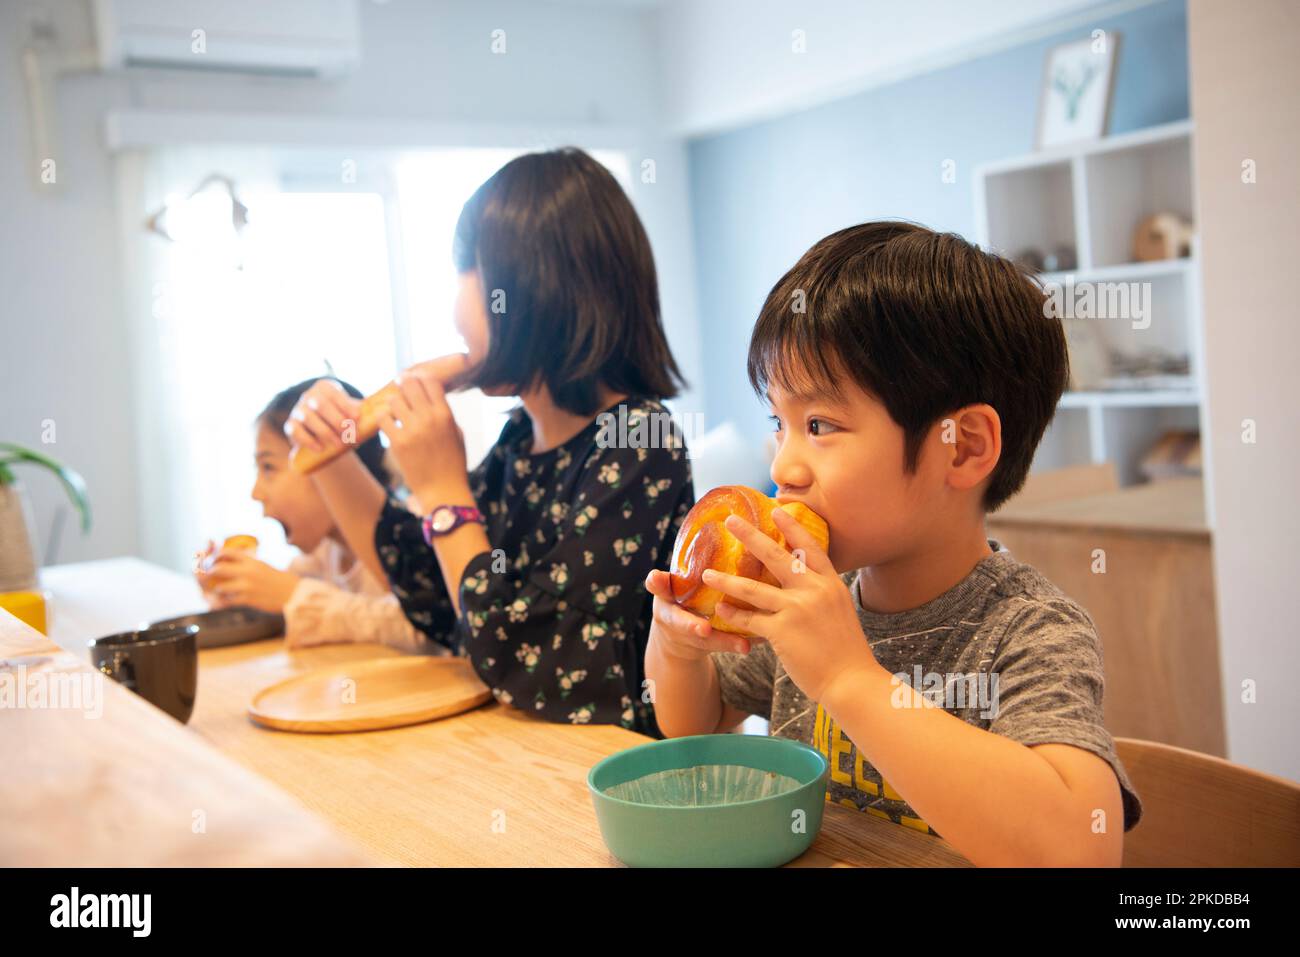 Children eating bread at the counter Stock Photo